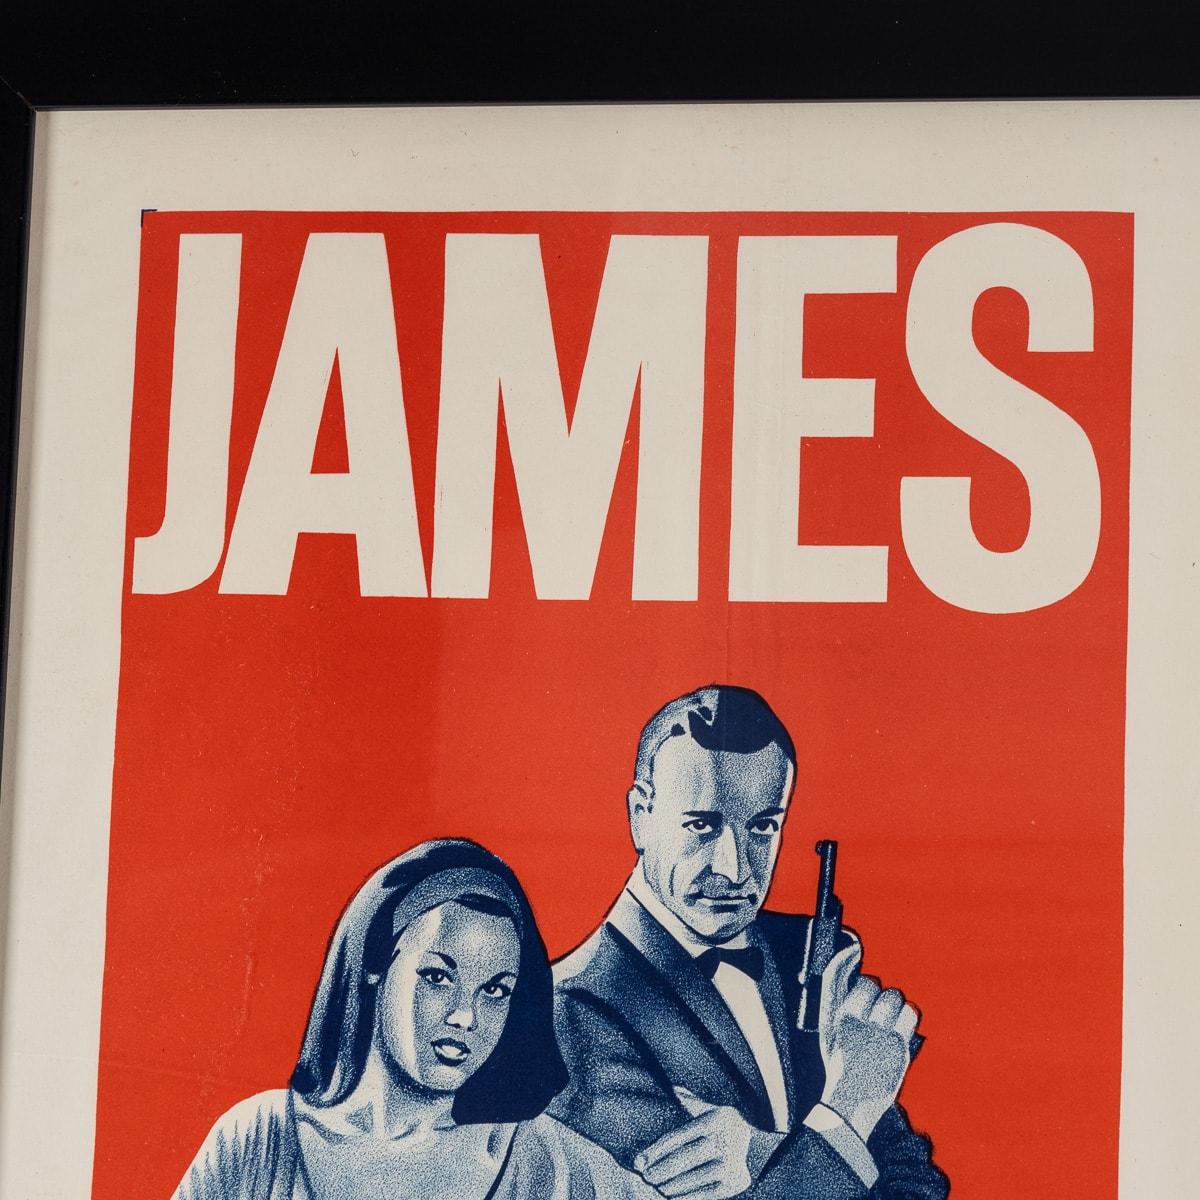 A very rare and original Australian release massive theater poster from the 1963 'From Russia With Love'. A 1963 spy film and the second in the James Bond series produced by Eon Productions, as well as Sean Connery's second role as MI6 agent James